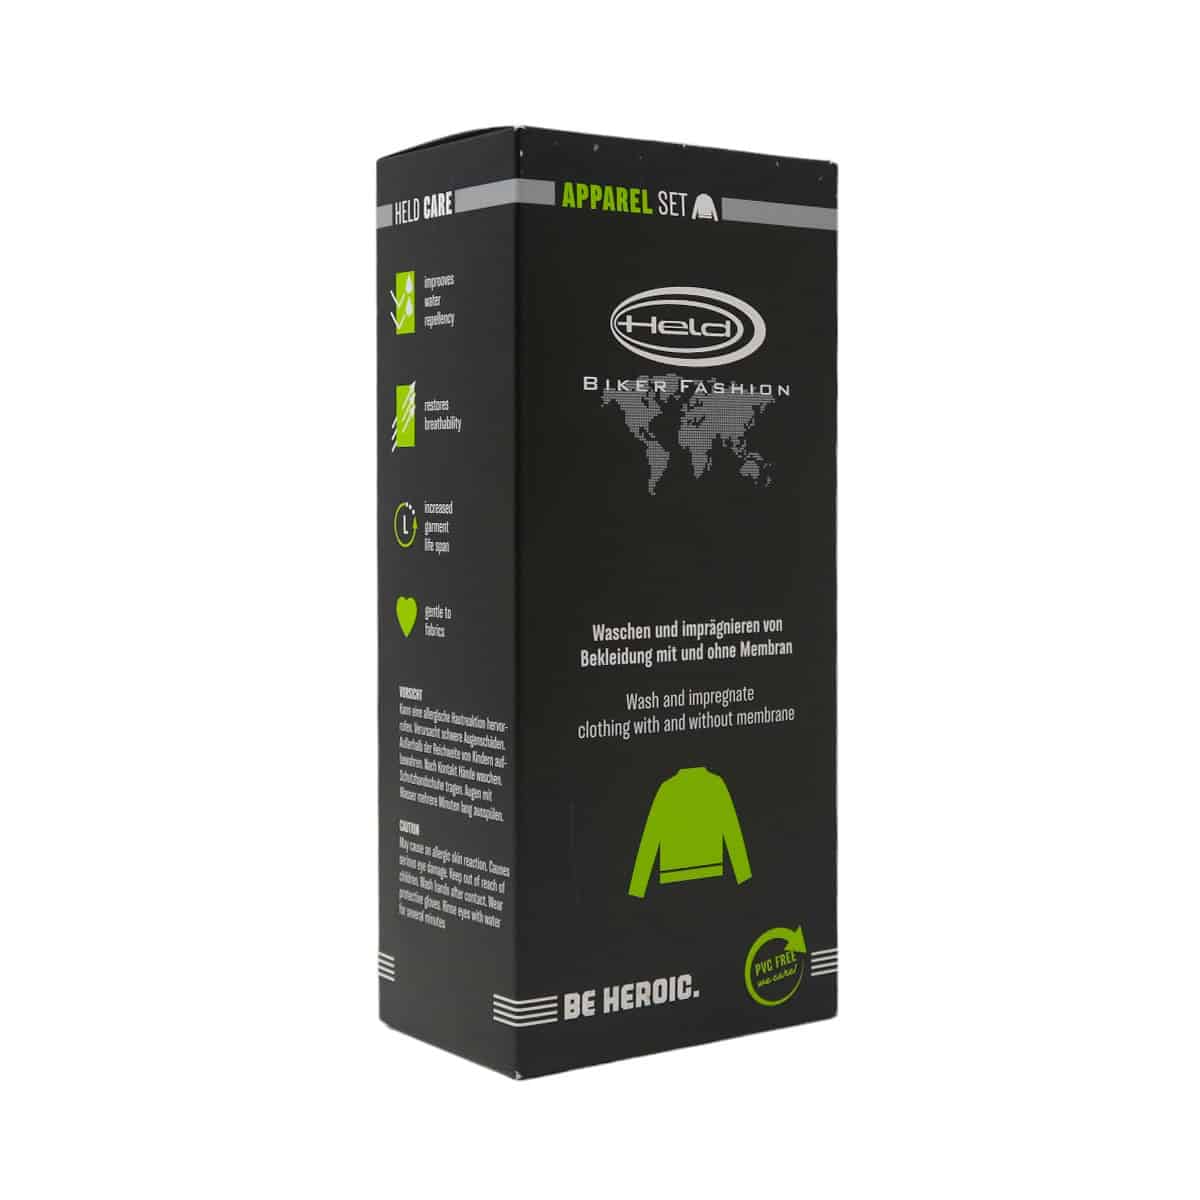 Specialist Textile Care Set for motorcycle clothing & Gore-Tex: Clean, care for & waterproof your textiles Pack